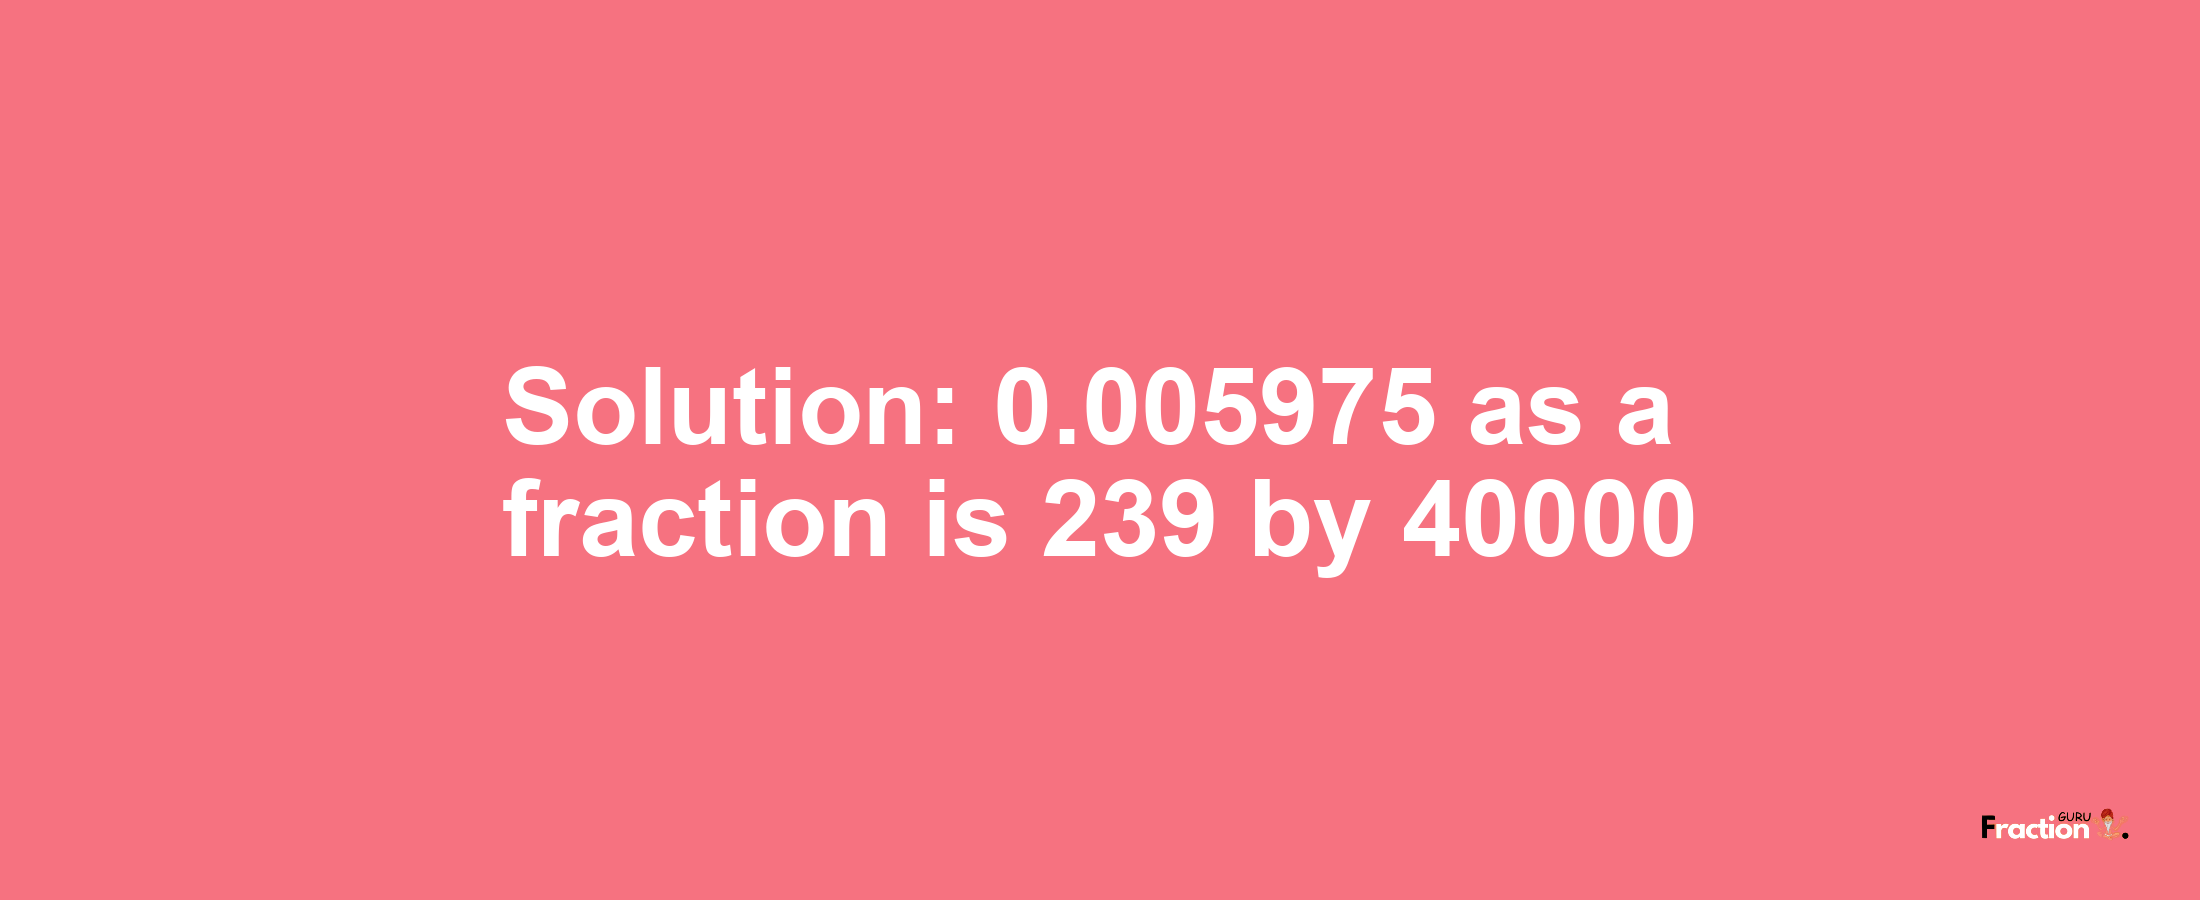 Solution:0.005975 as a fraction is 239/40000